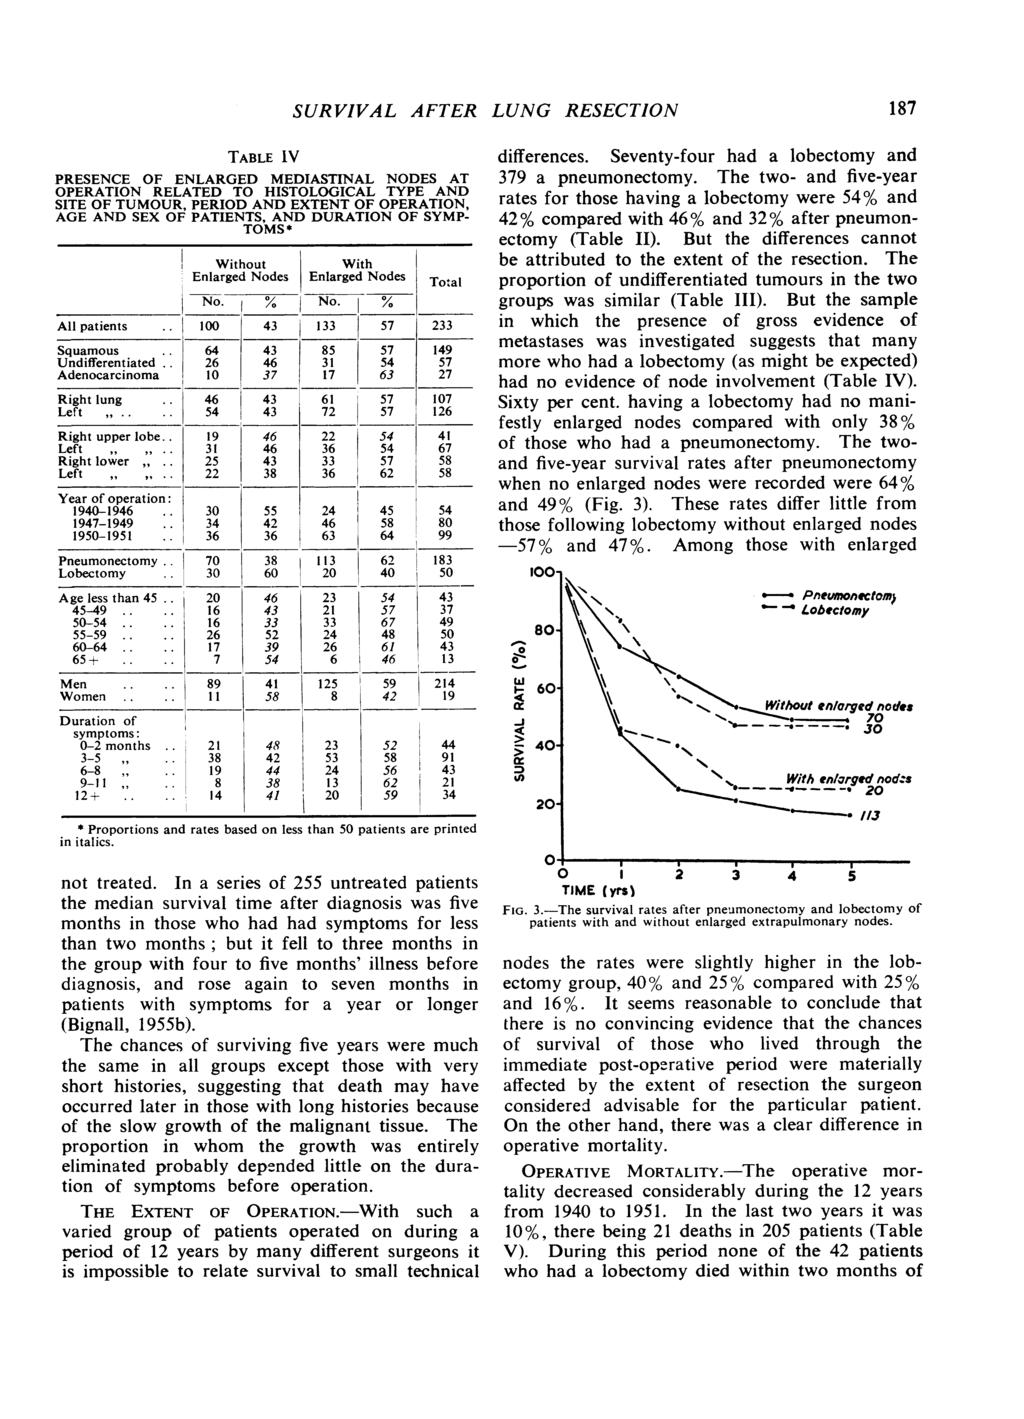 TABLE IV PRESENCE OF ENLARGED MEDIASTINAL NODES AT OPERATION RELATED TO HISTOLOGICAL TYPE AND SITE OF TUMOUR, PERIOD AND EXTENT OF OPERATION, AGE AND SEX OF PATIENTS, AND DURATION OF SYMP- TOMS*